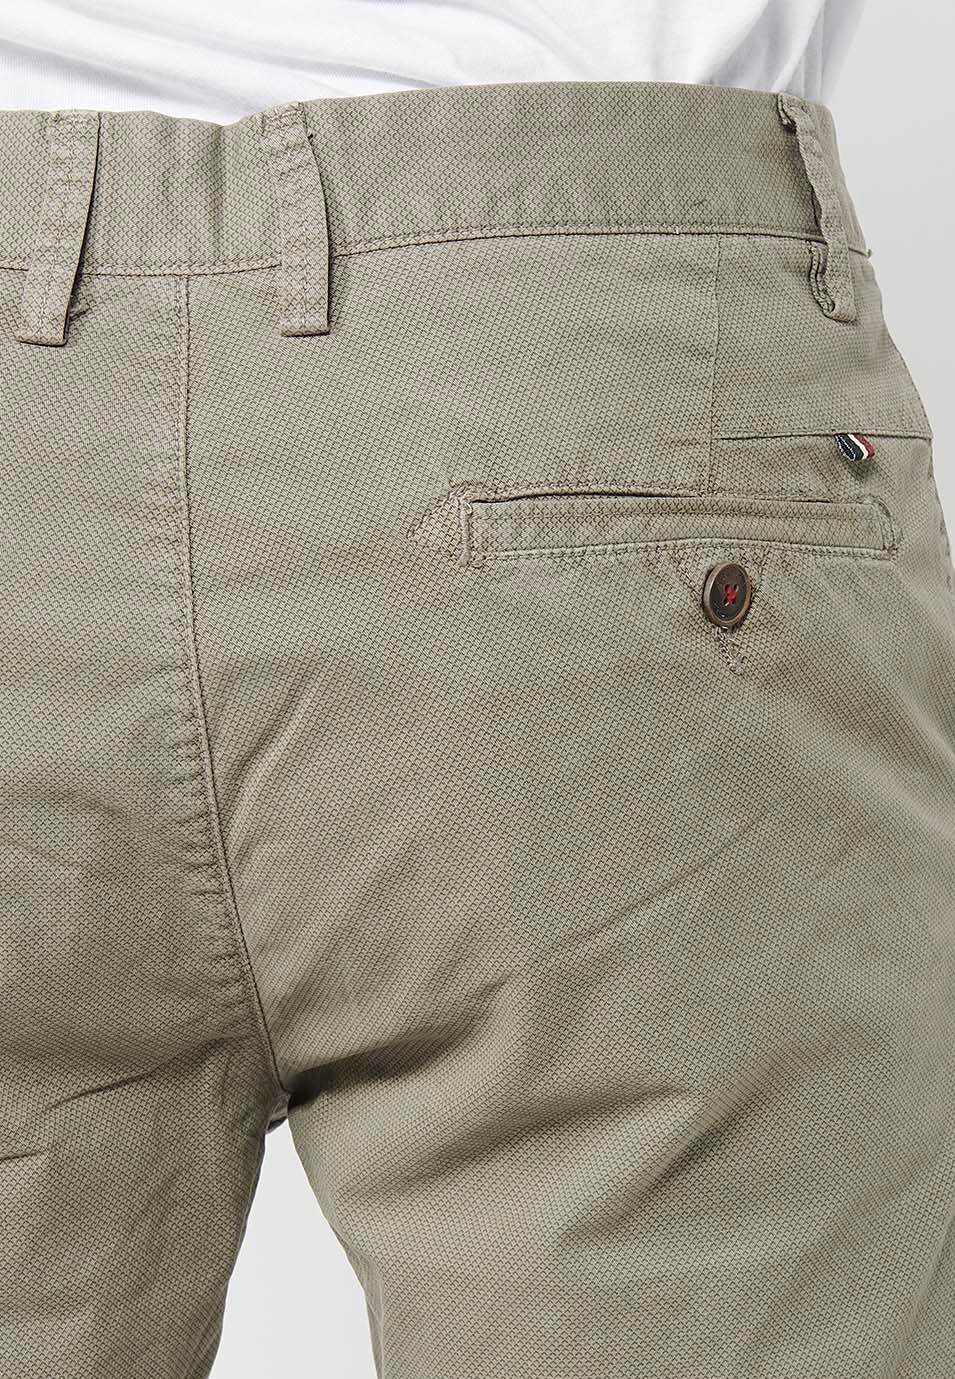 Men's Bermuda Chino Shorts with Turn-Up Finish with Front Zipper and Button Closure with Four Pockets in Mink Color 7